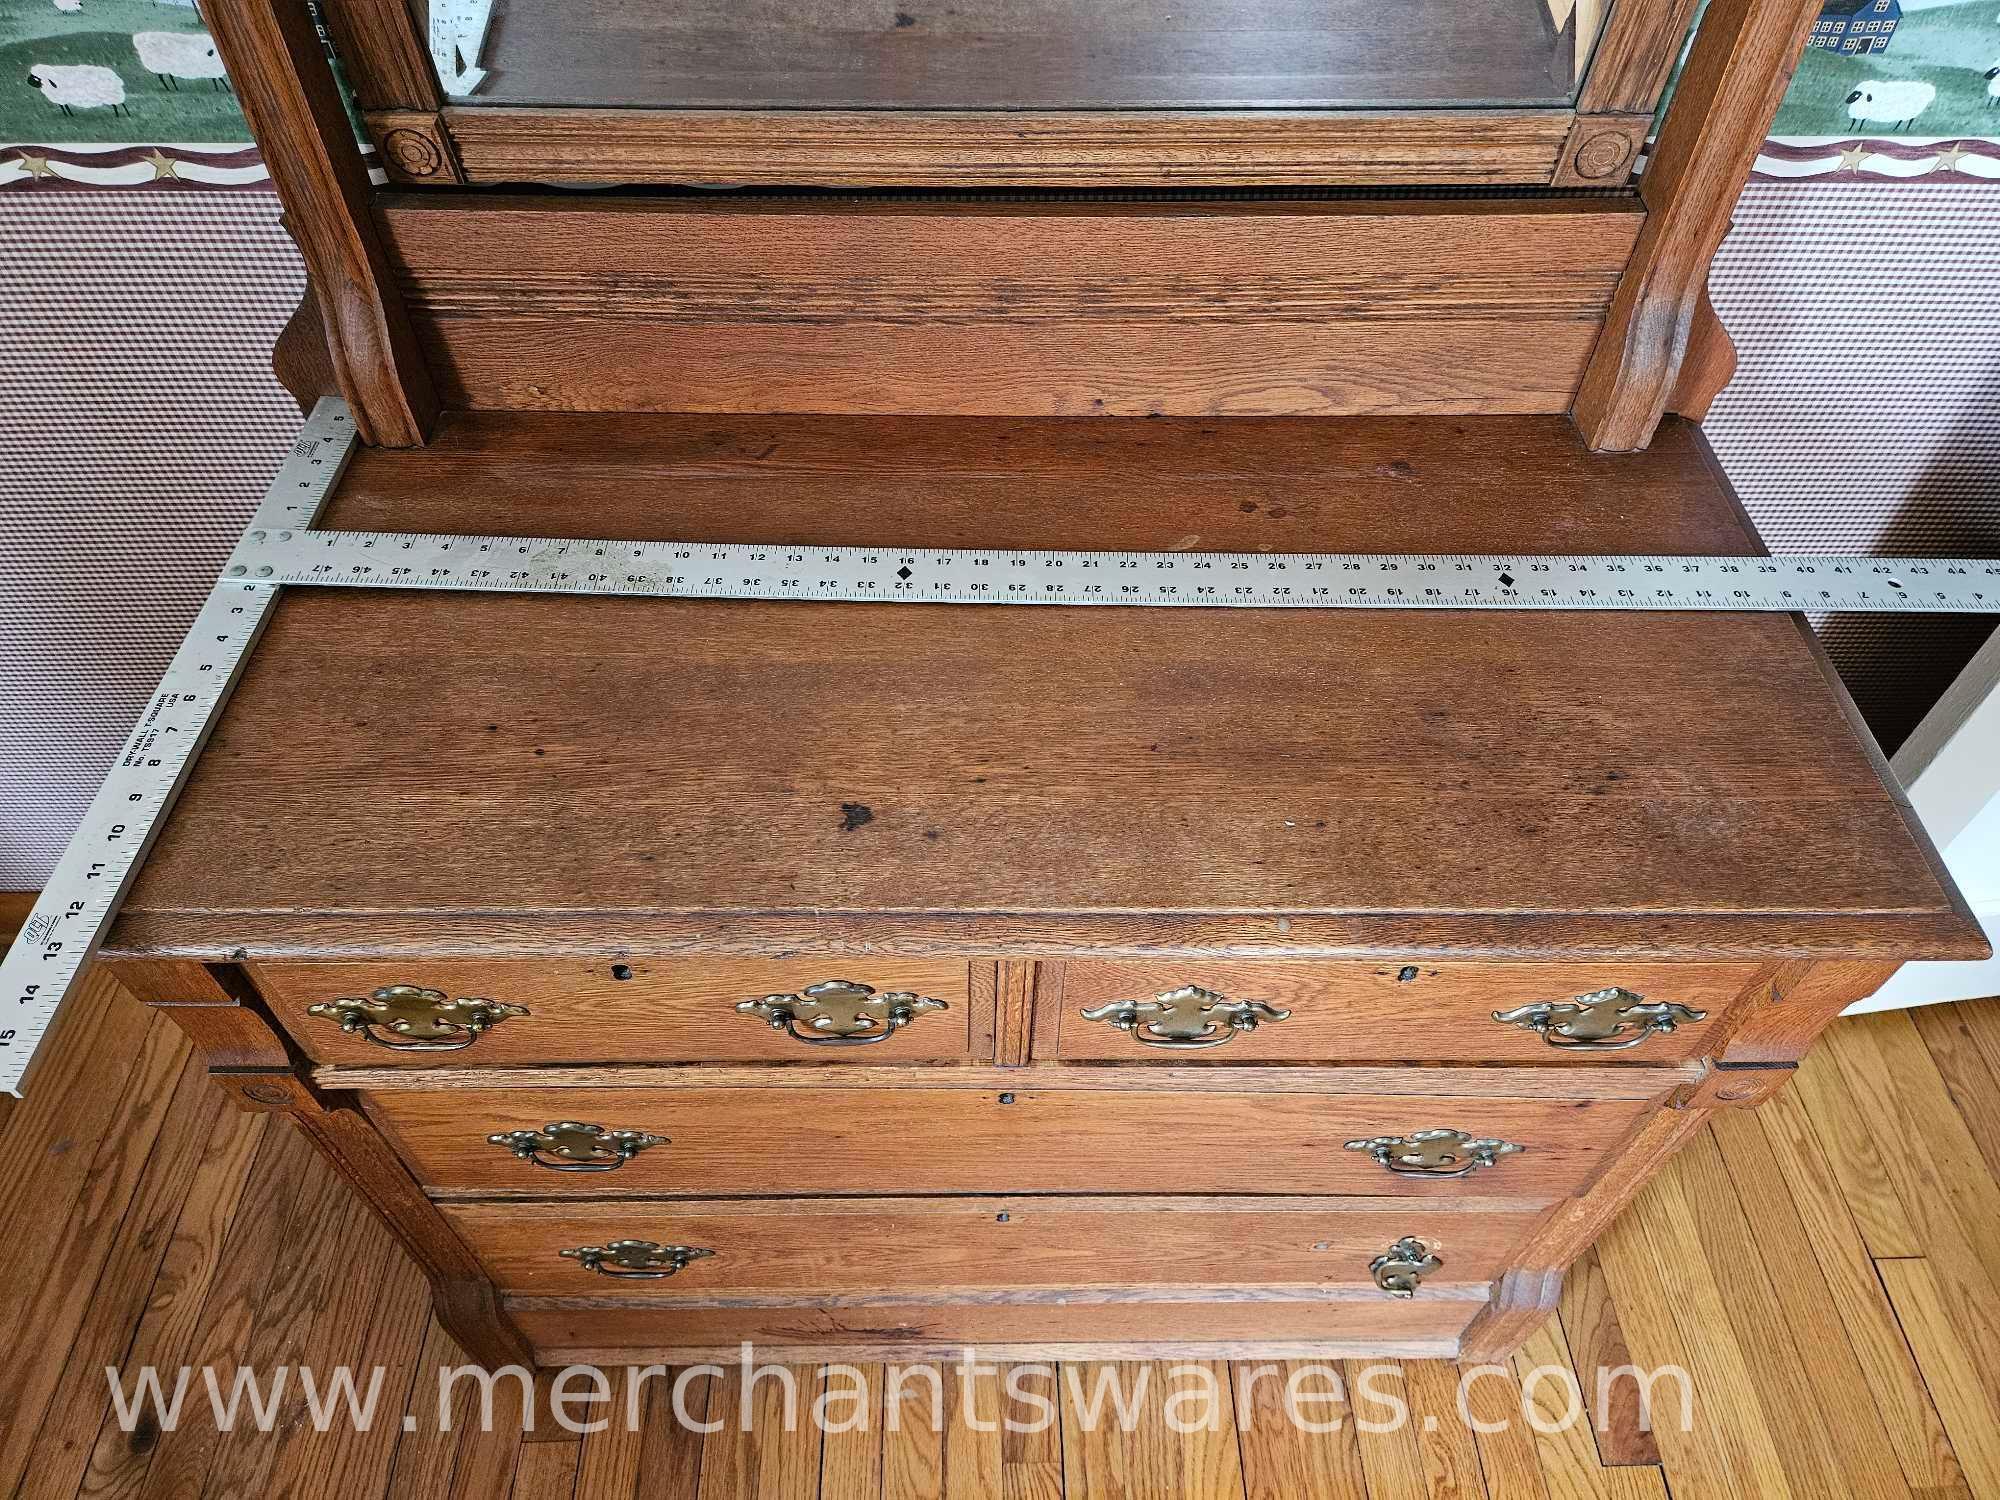 Two Piece Antique Solid Wood Dresser with Mirror and Dove Tailed Drawers